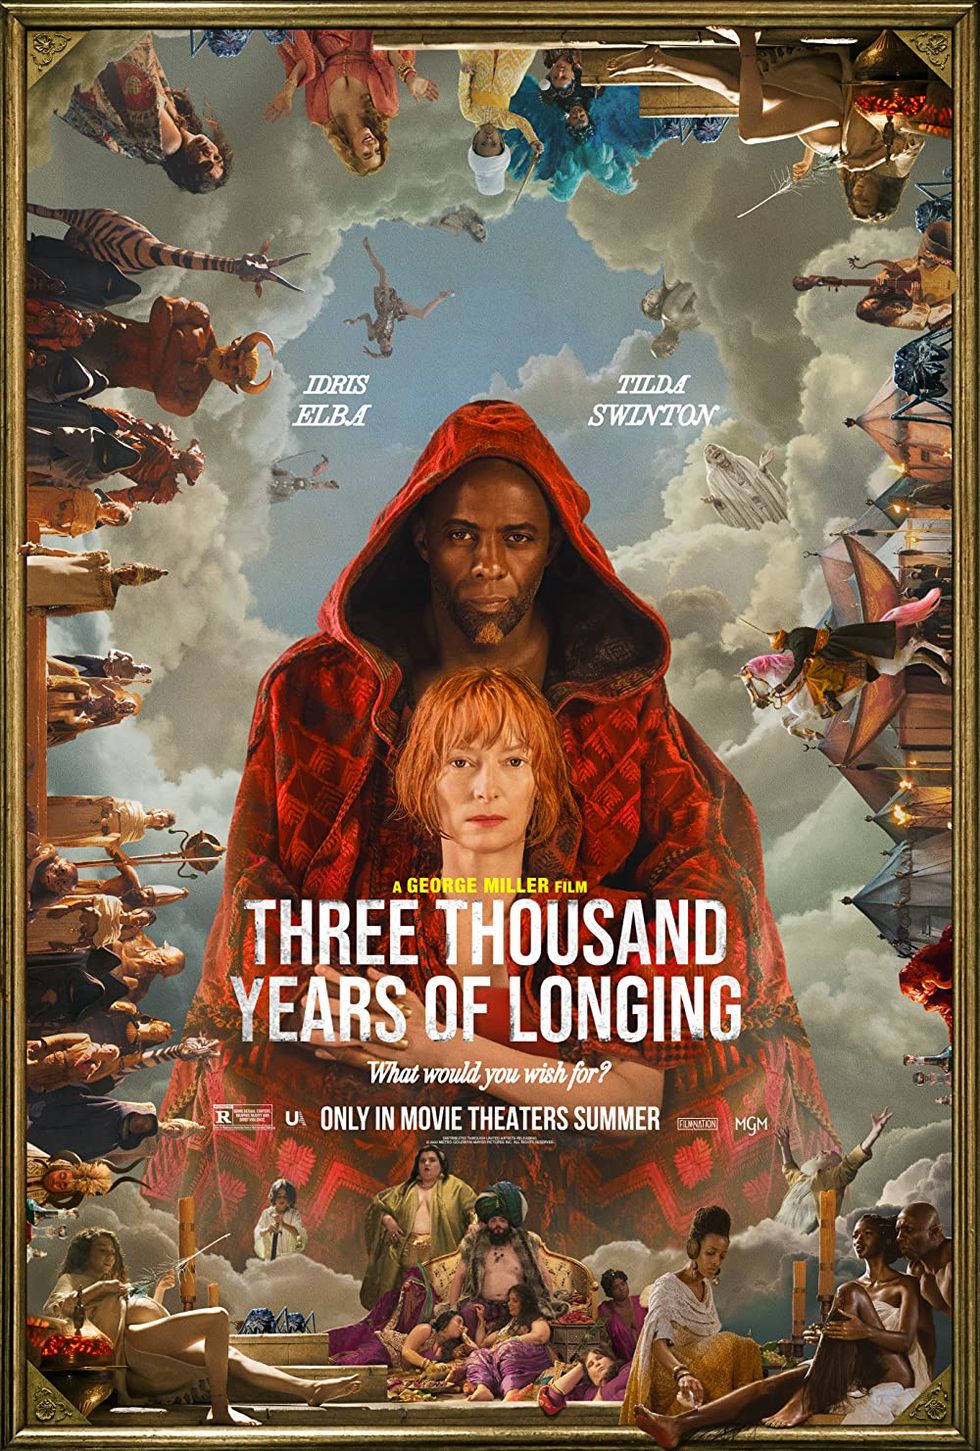 idris elba and tilda swinton feature on the poster for their new movie three thousand years of longing